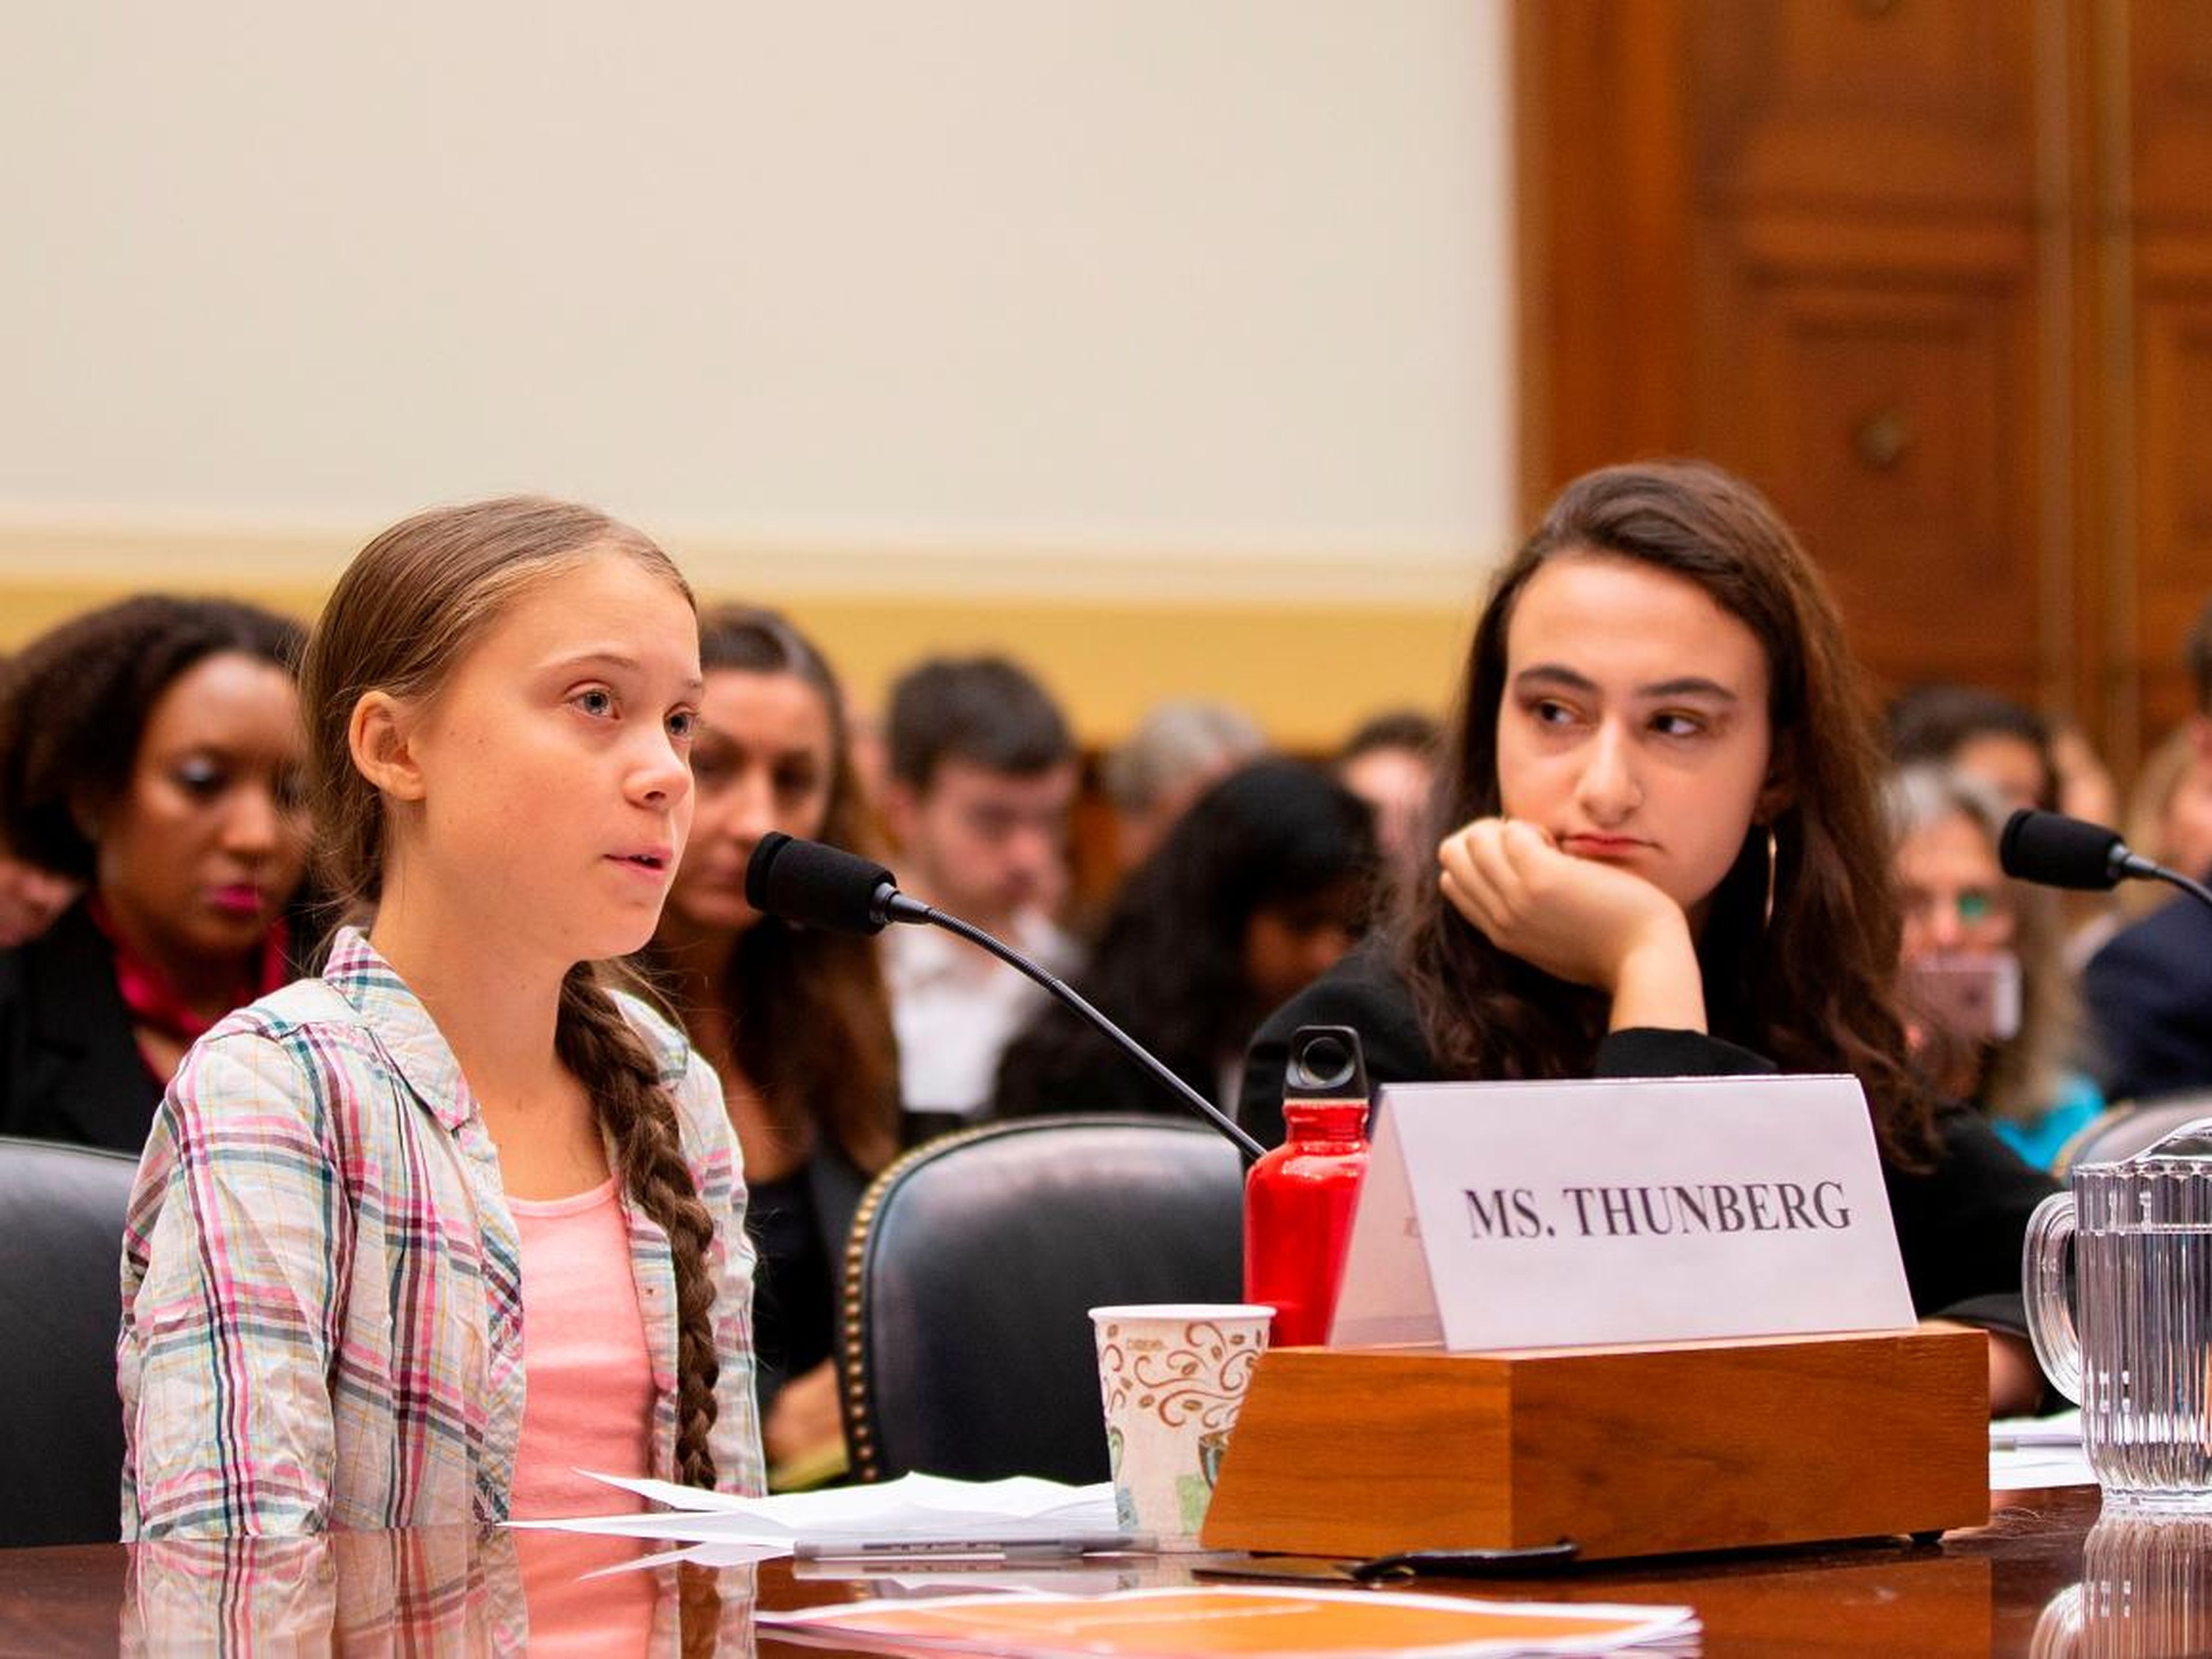 Greta Thunberg speaks during a joint hearing before the House Foreign Affairs Committee and the House Select Committee on the Climate Crisis in Washington, DC, September 18, 2019.